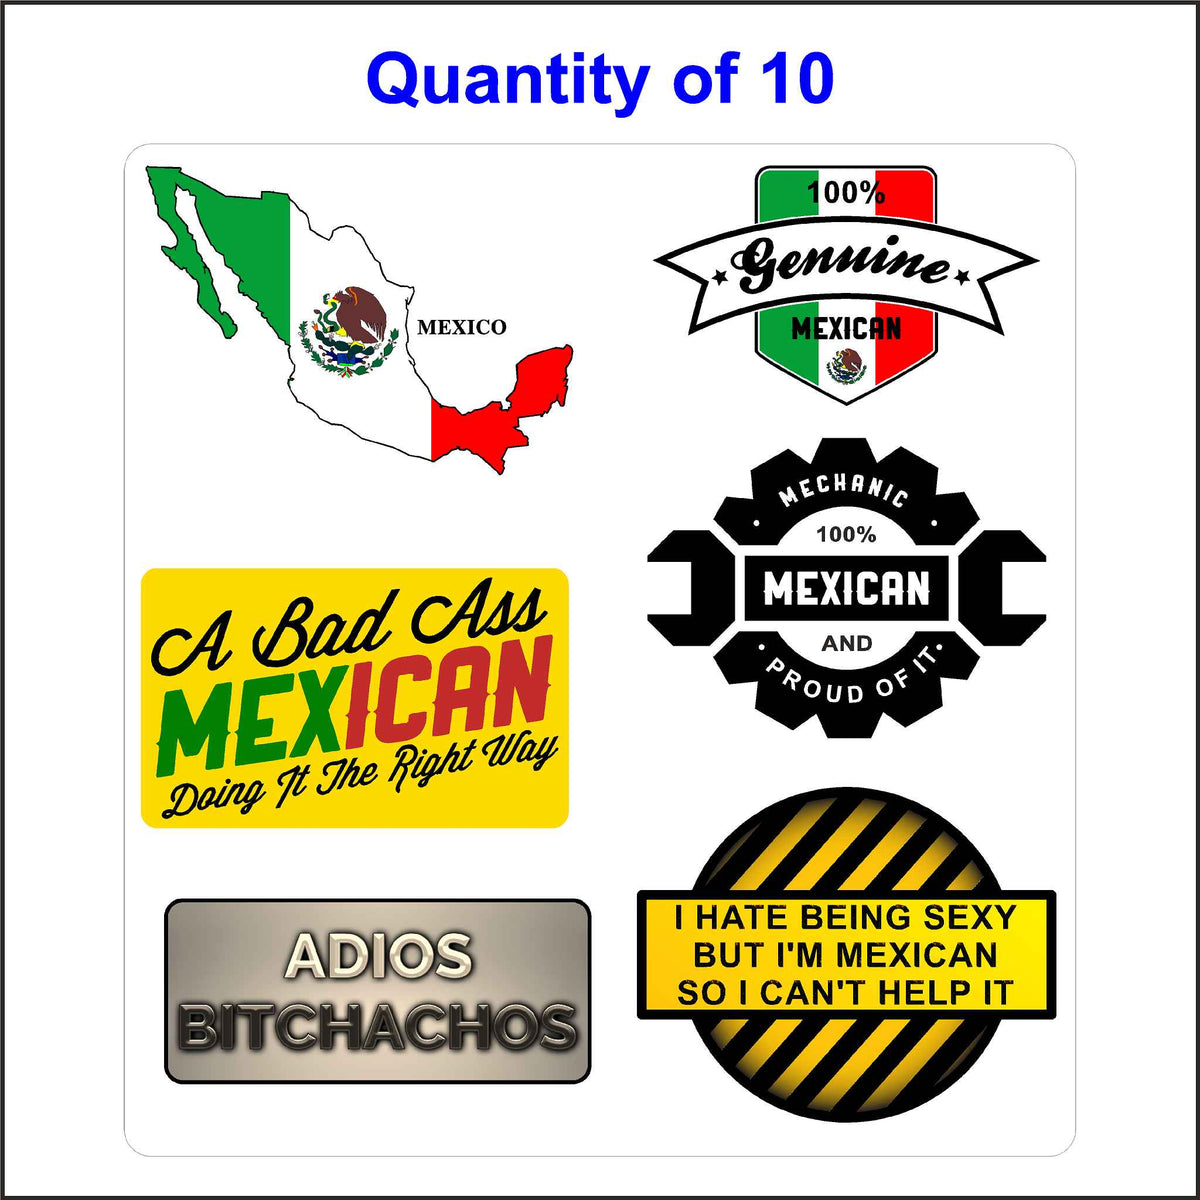 Funny Mexican Hard Hat Stickers, Bad Ass Mexican, Adios Bitchachos. 10 Quantity.